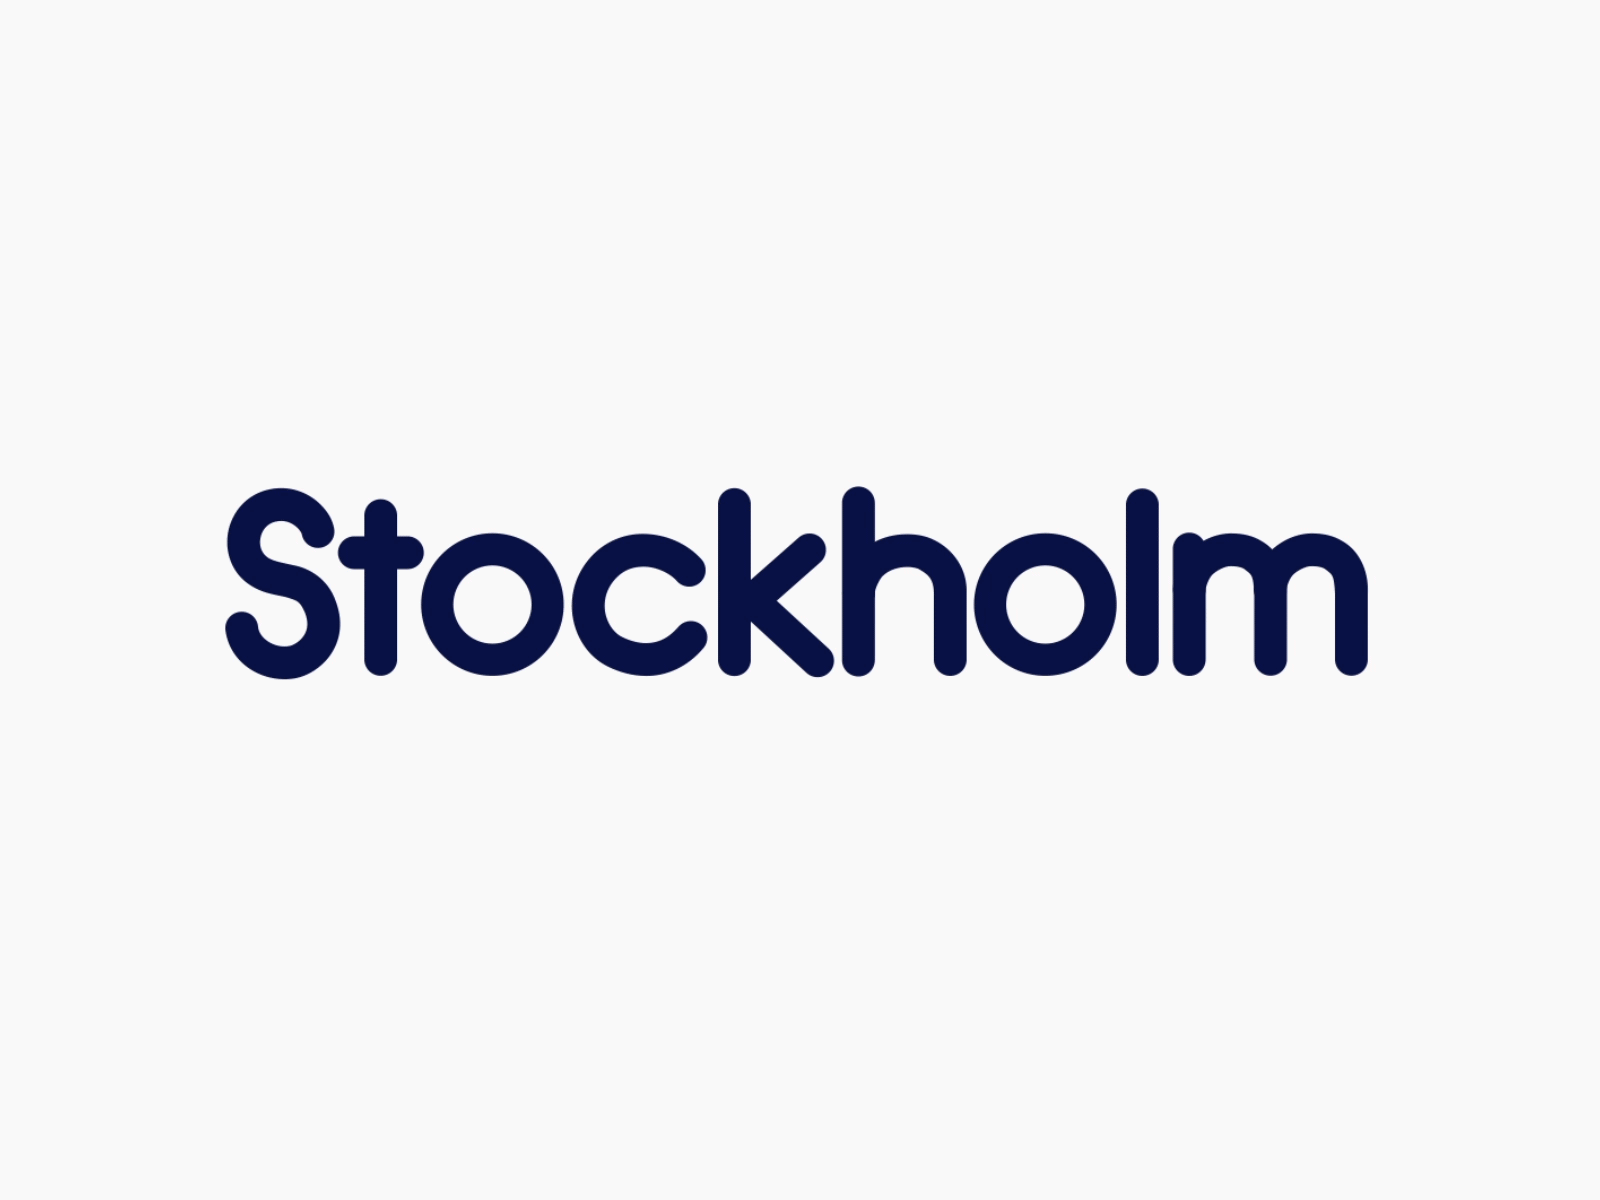 Stockholm 🇸🇪 by Sofie Nilsson on Dribbble